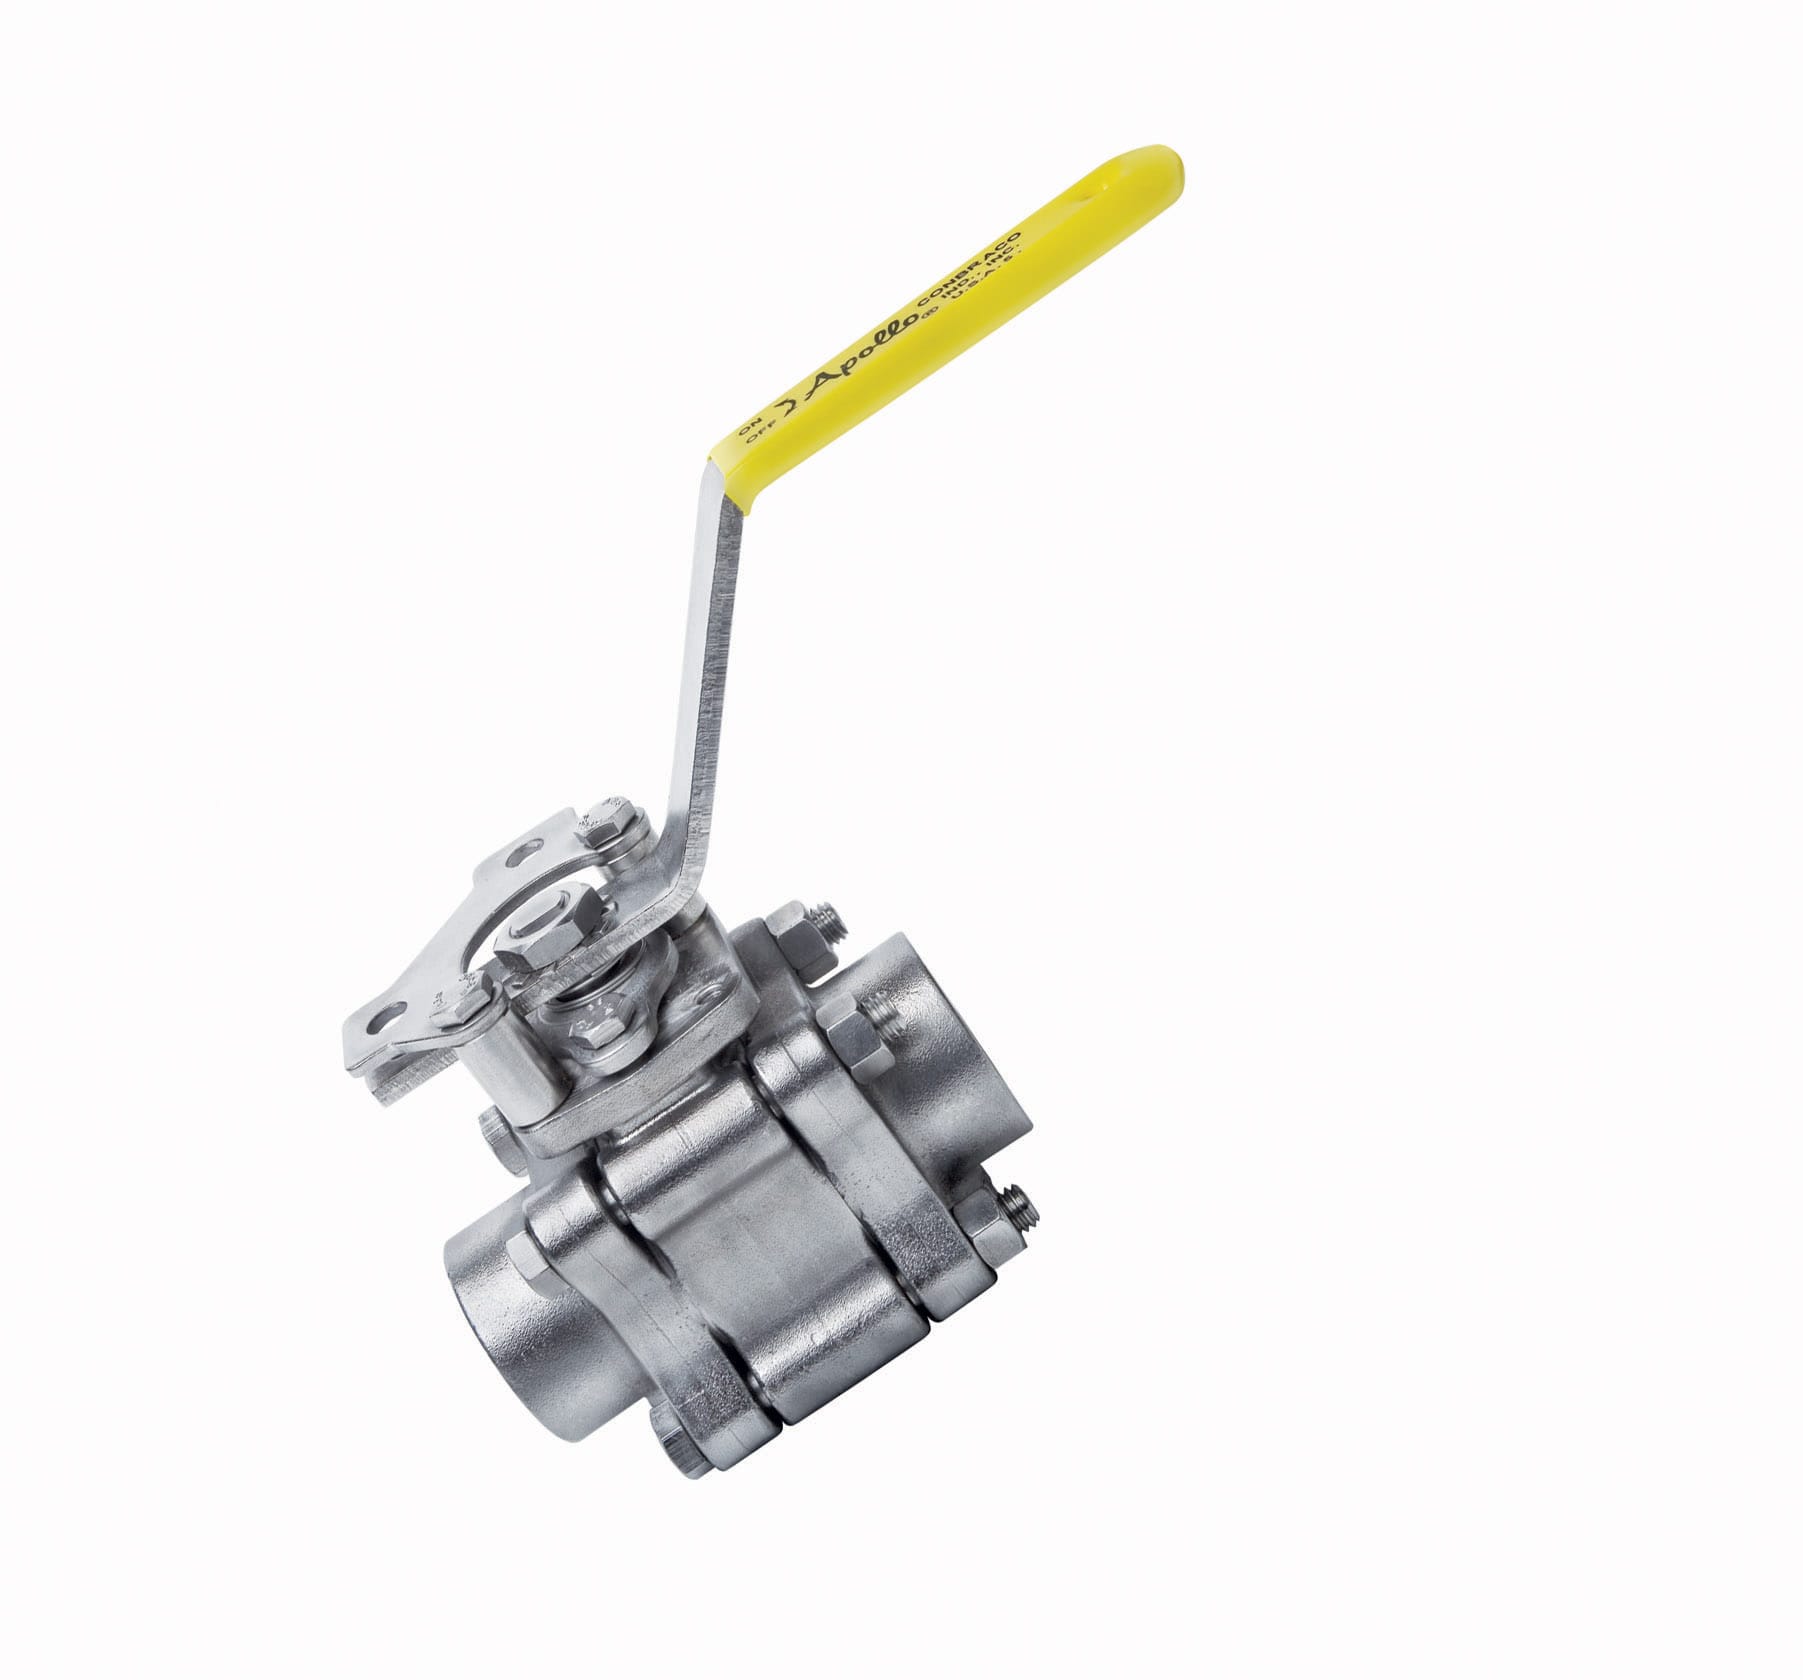 Ball Valve, Size 3/4 Inch NPT, 3 Pieces, Stainless Steel